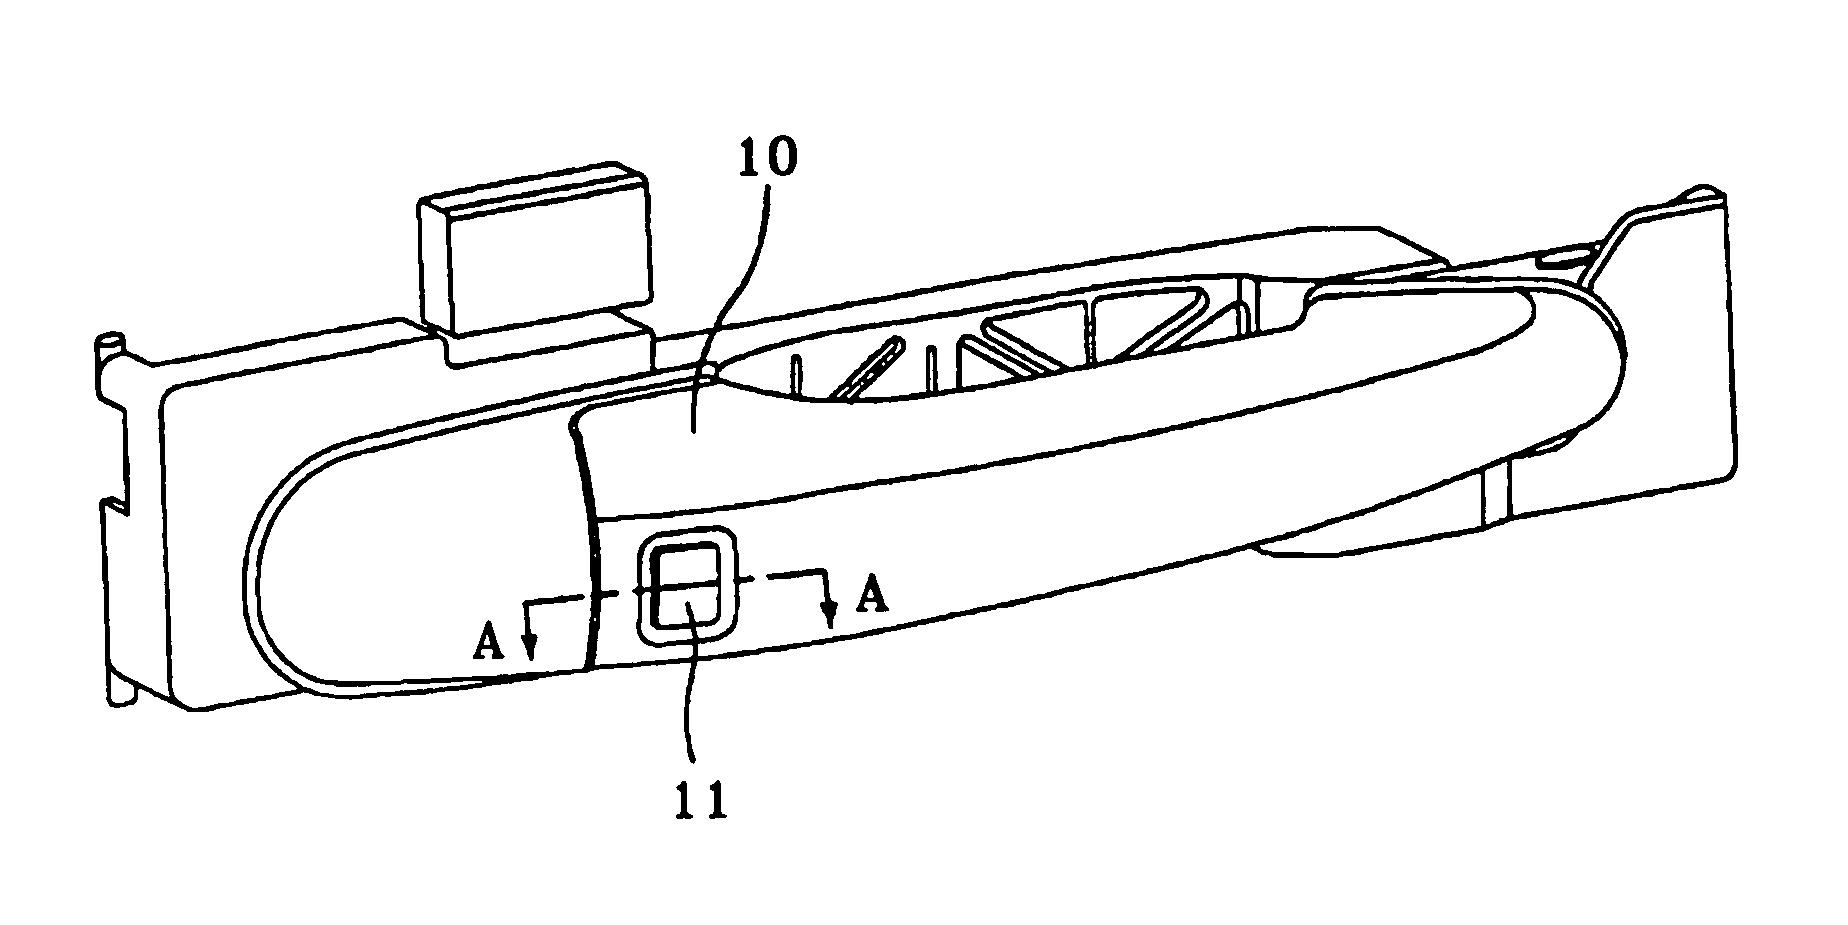 Light-emitting device indicating location of outside door handle